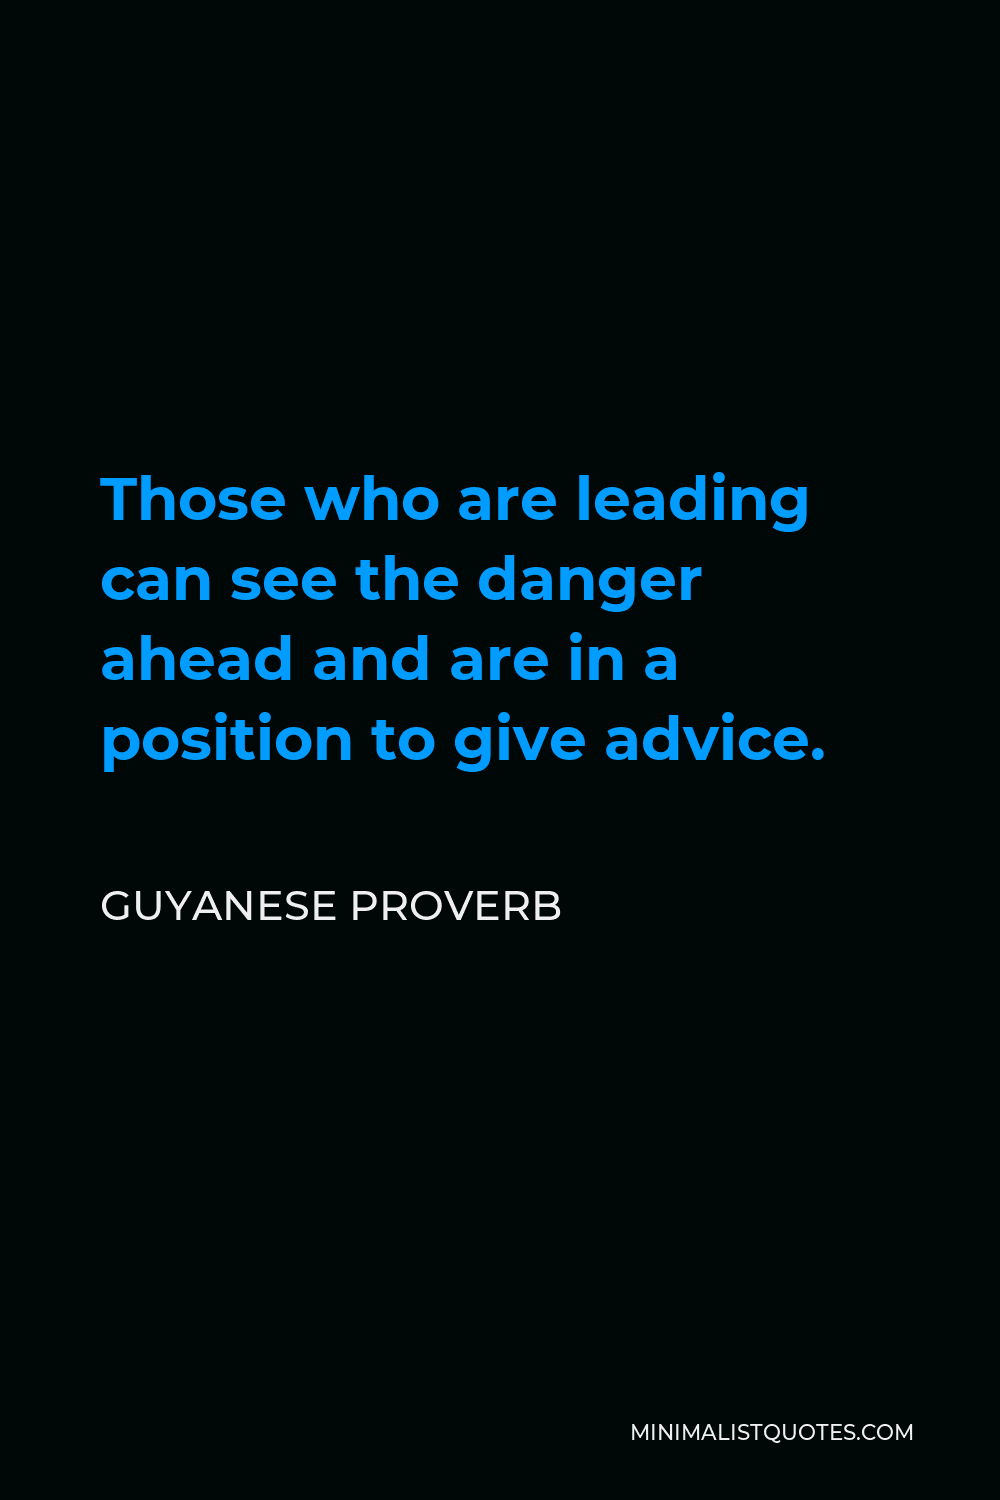 Guyanese Proverb Quote - Those who are leading can see the danger ahead and are in a position to give advice.